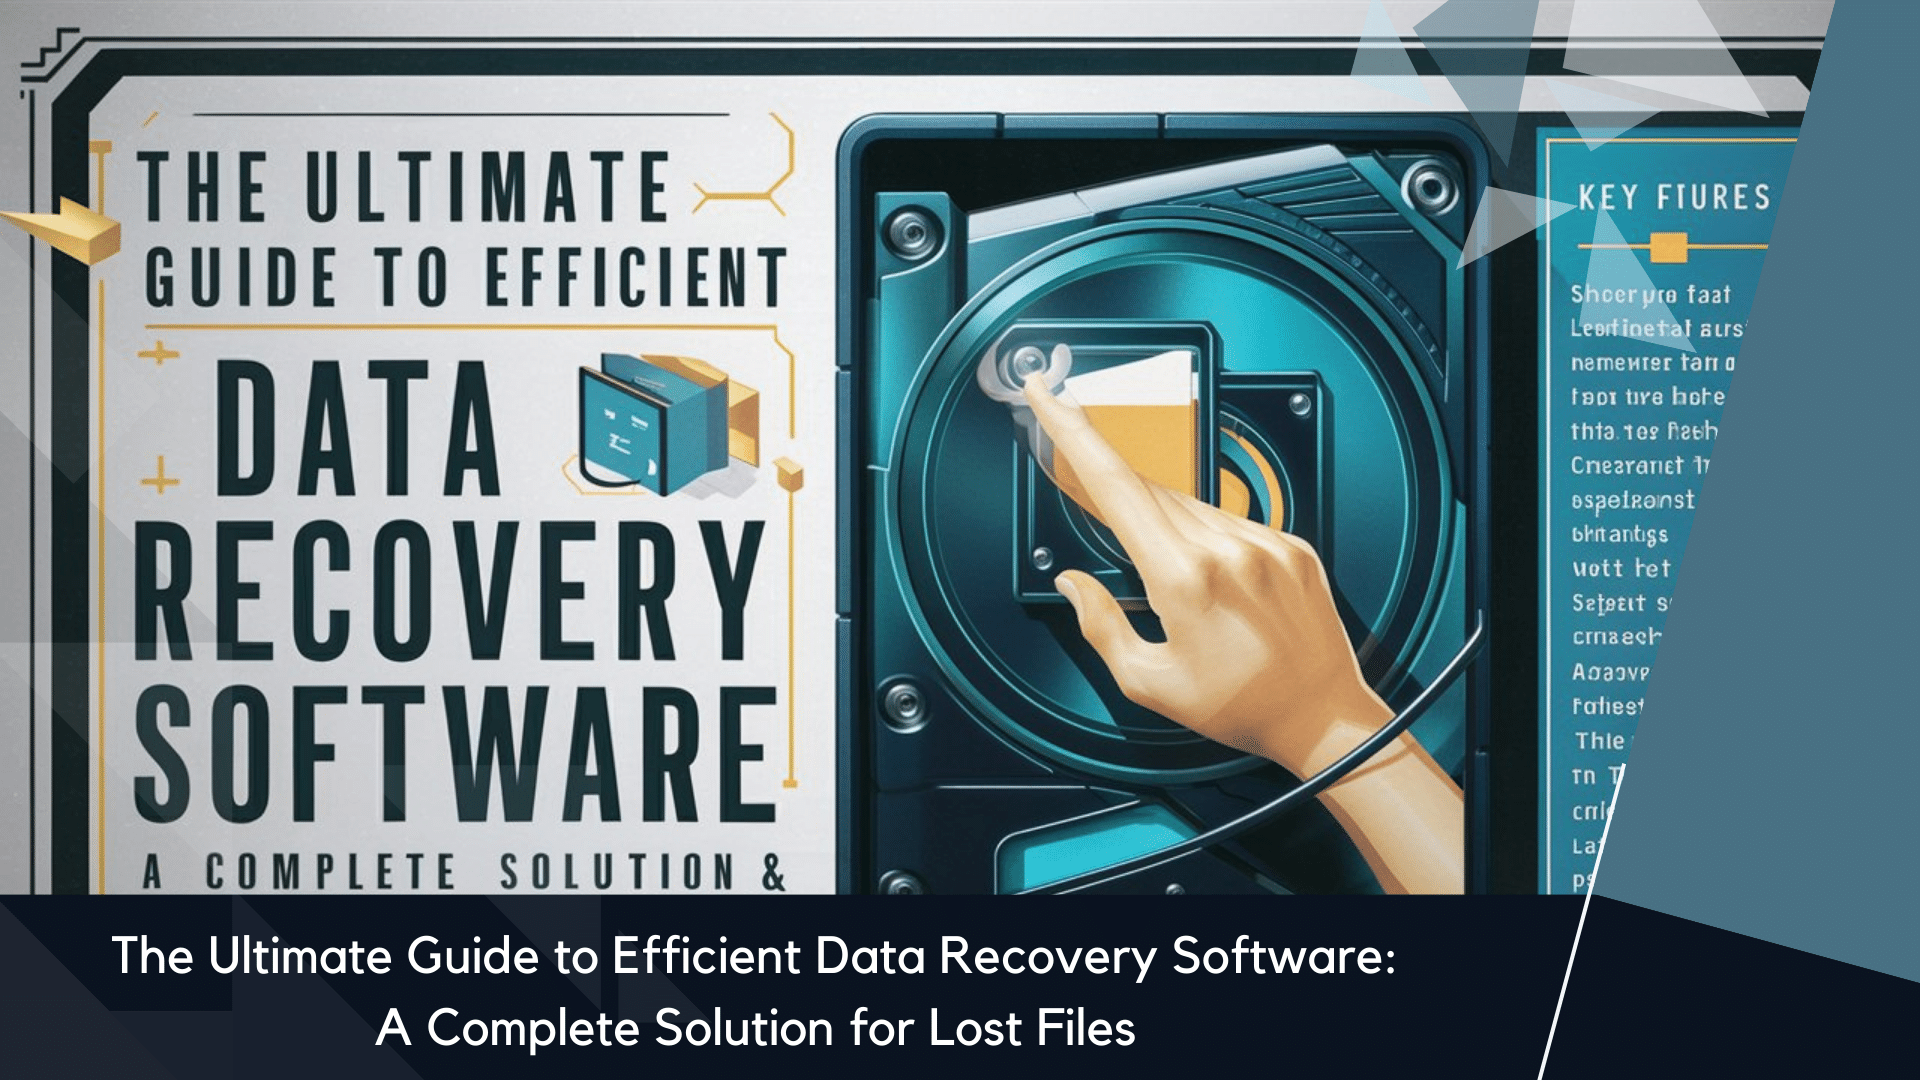 The Ultimate Guide to Efficient Data Recovery Software A Complete Solution for Lost Files